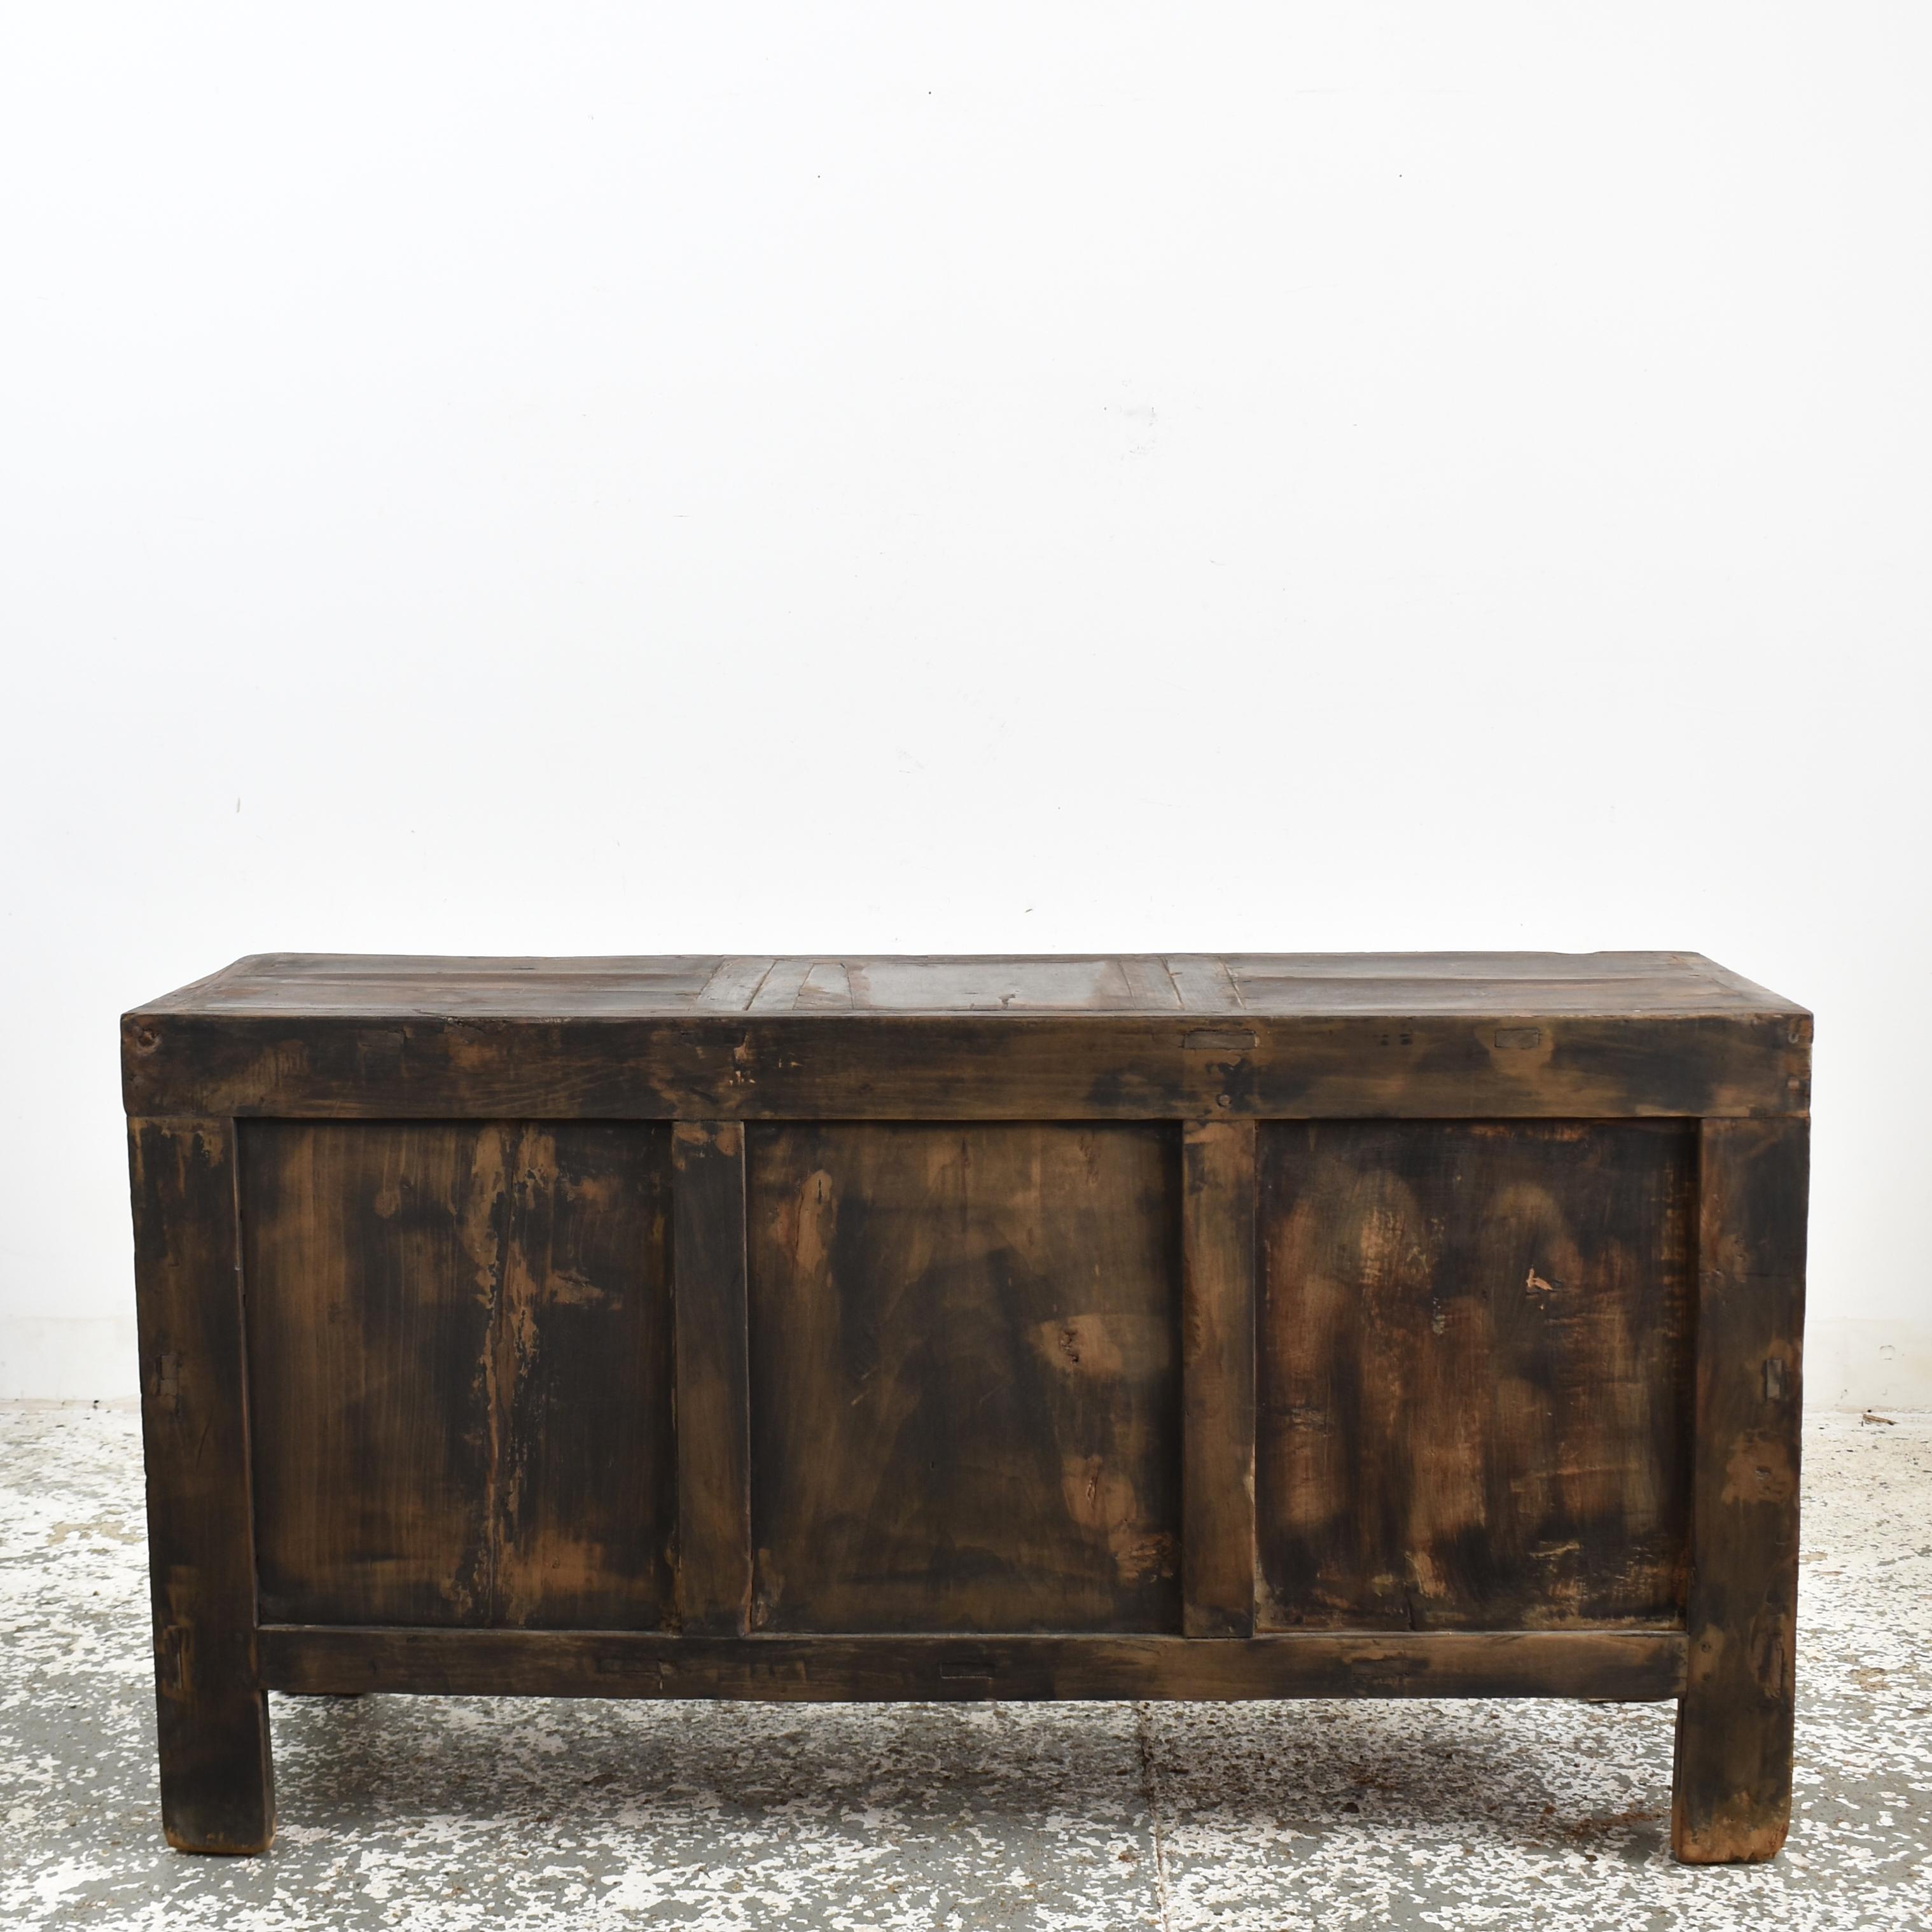 Antique Rustic Elm Haberdashery Kitchen Island Storage Sideboard In Distressed Condition For Sale In Stockbridge, GB